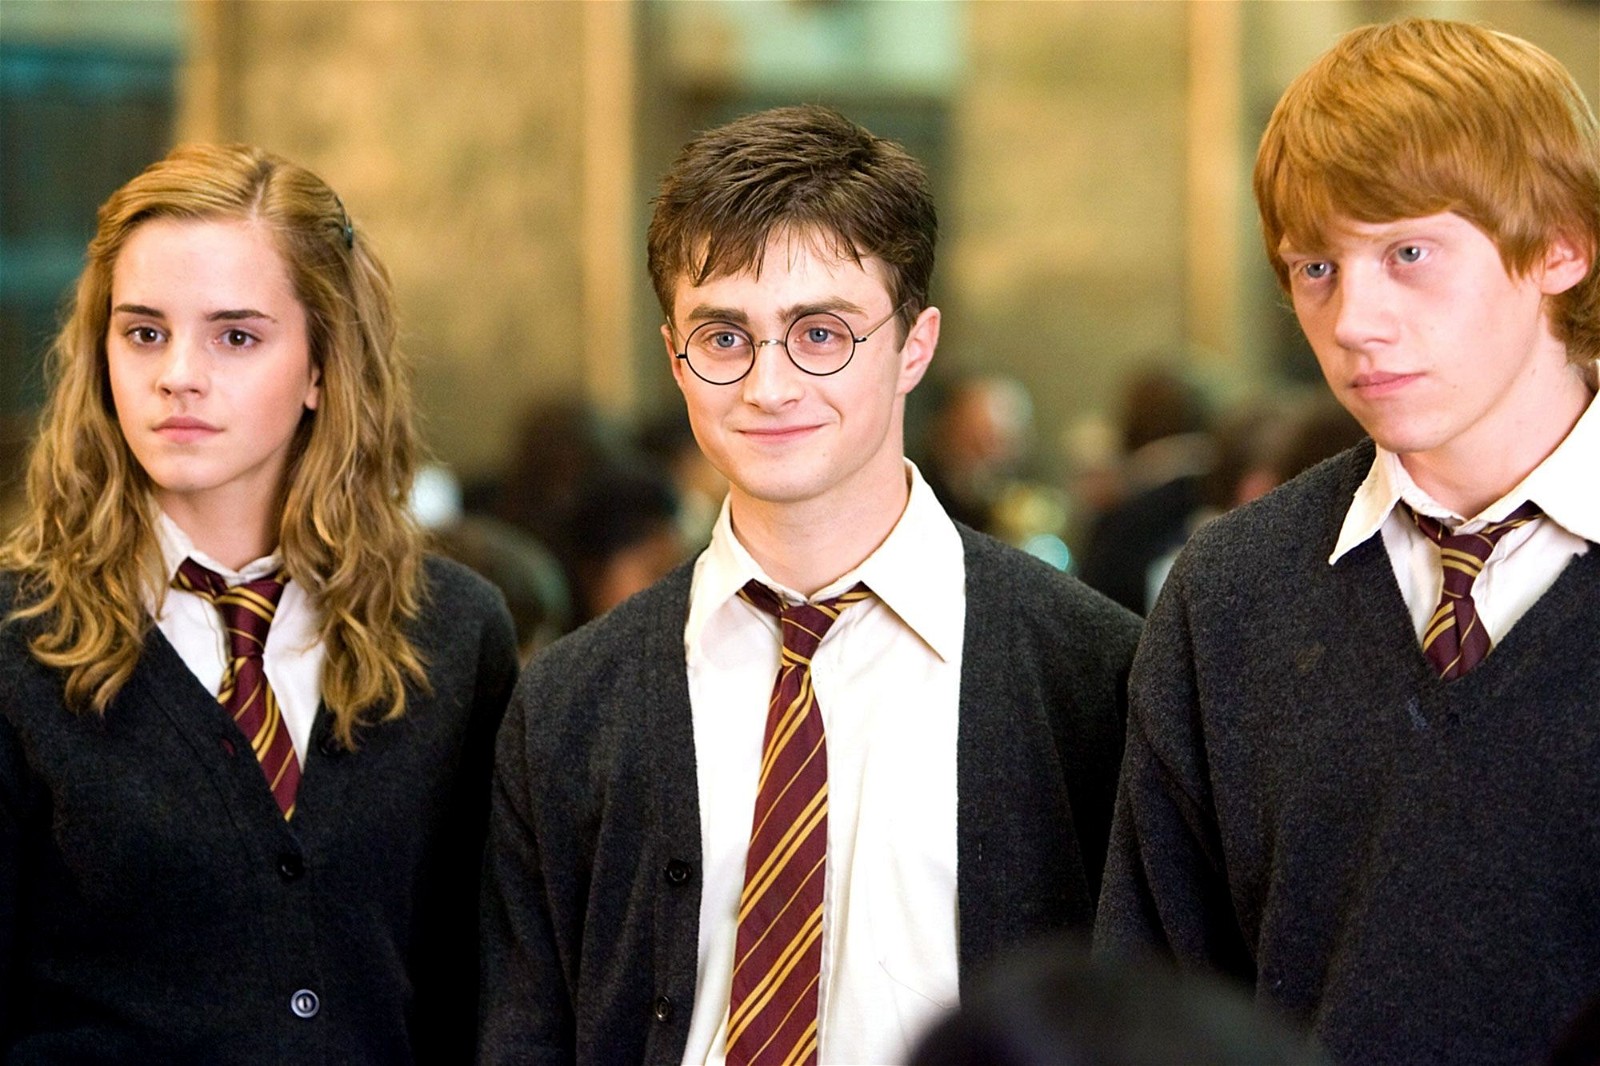 Emma Watson, Daniel Radcliffe, and Rupert Grint in the Harry Potter franchise.